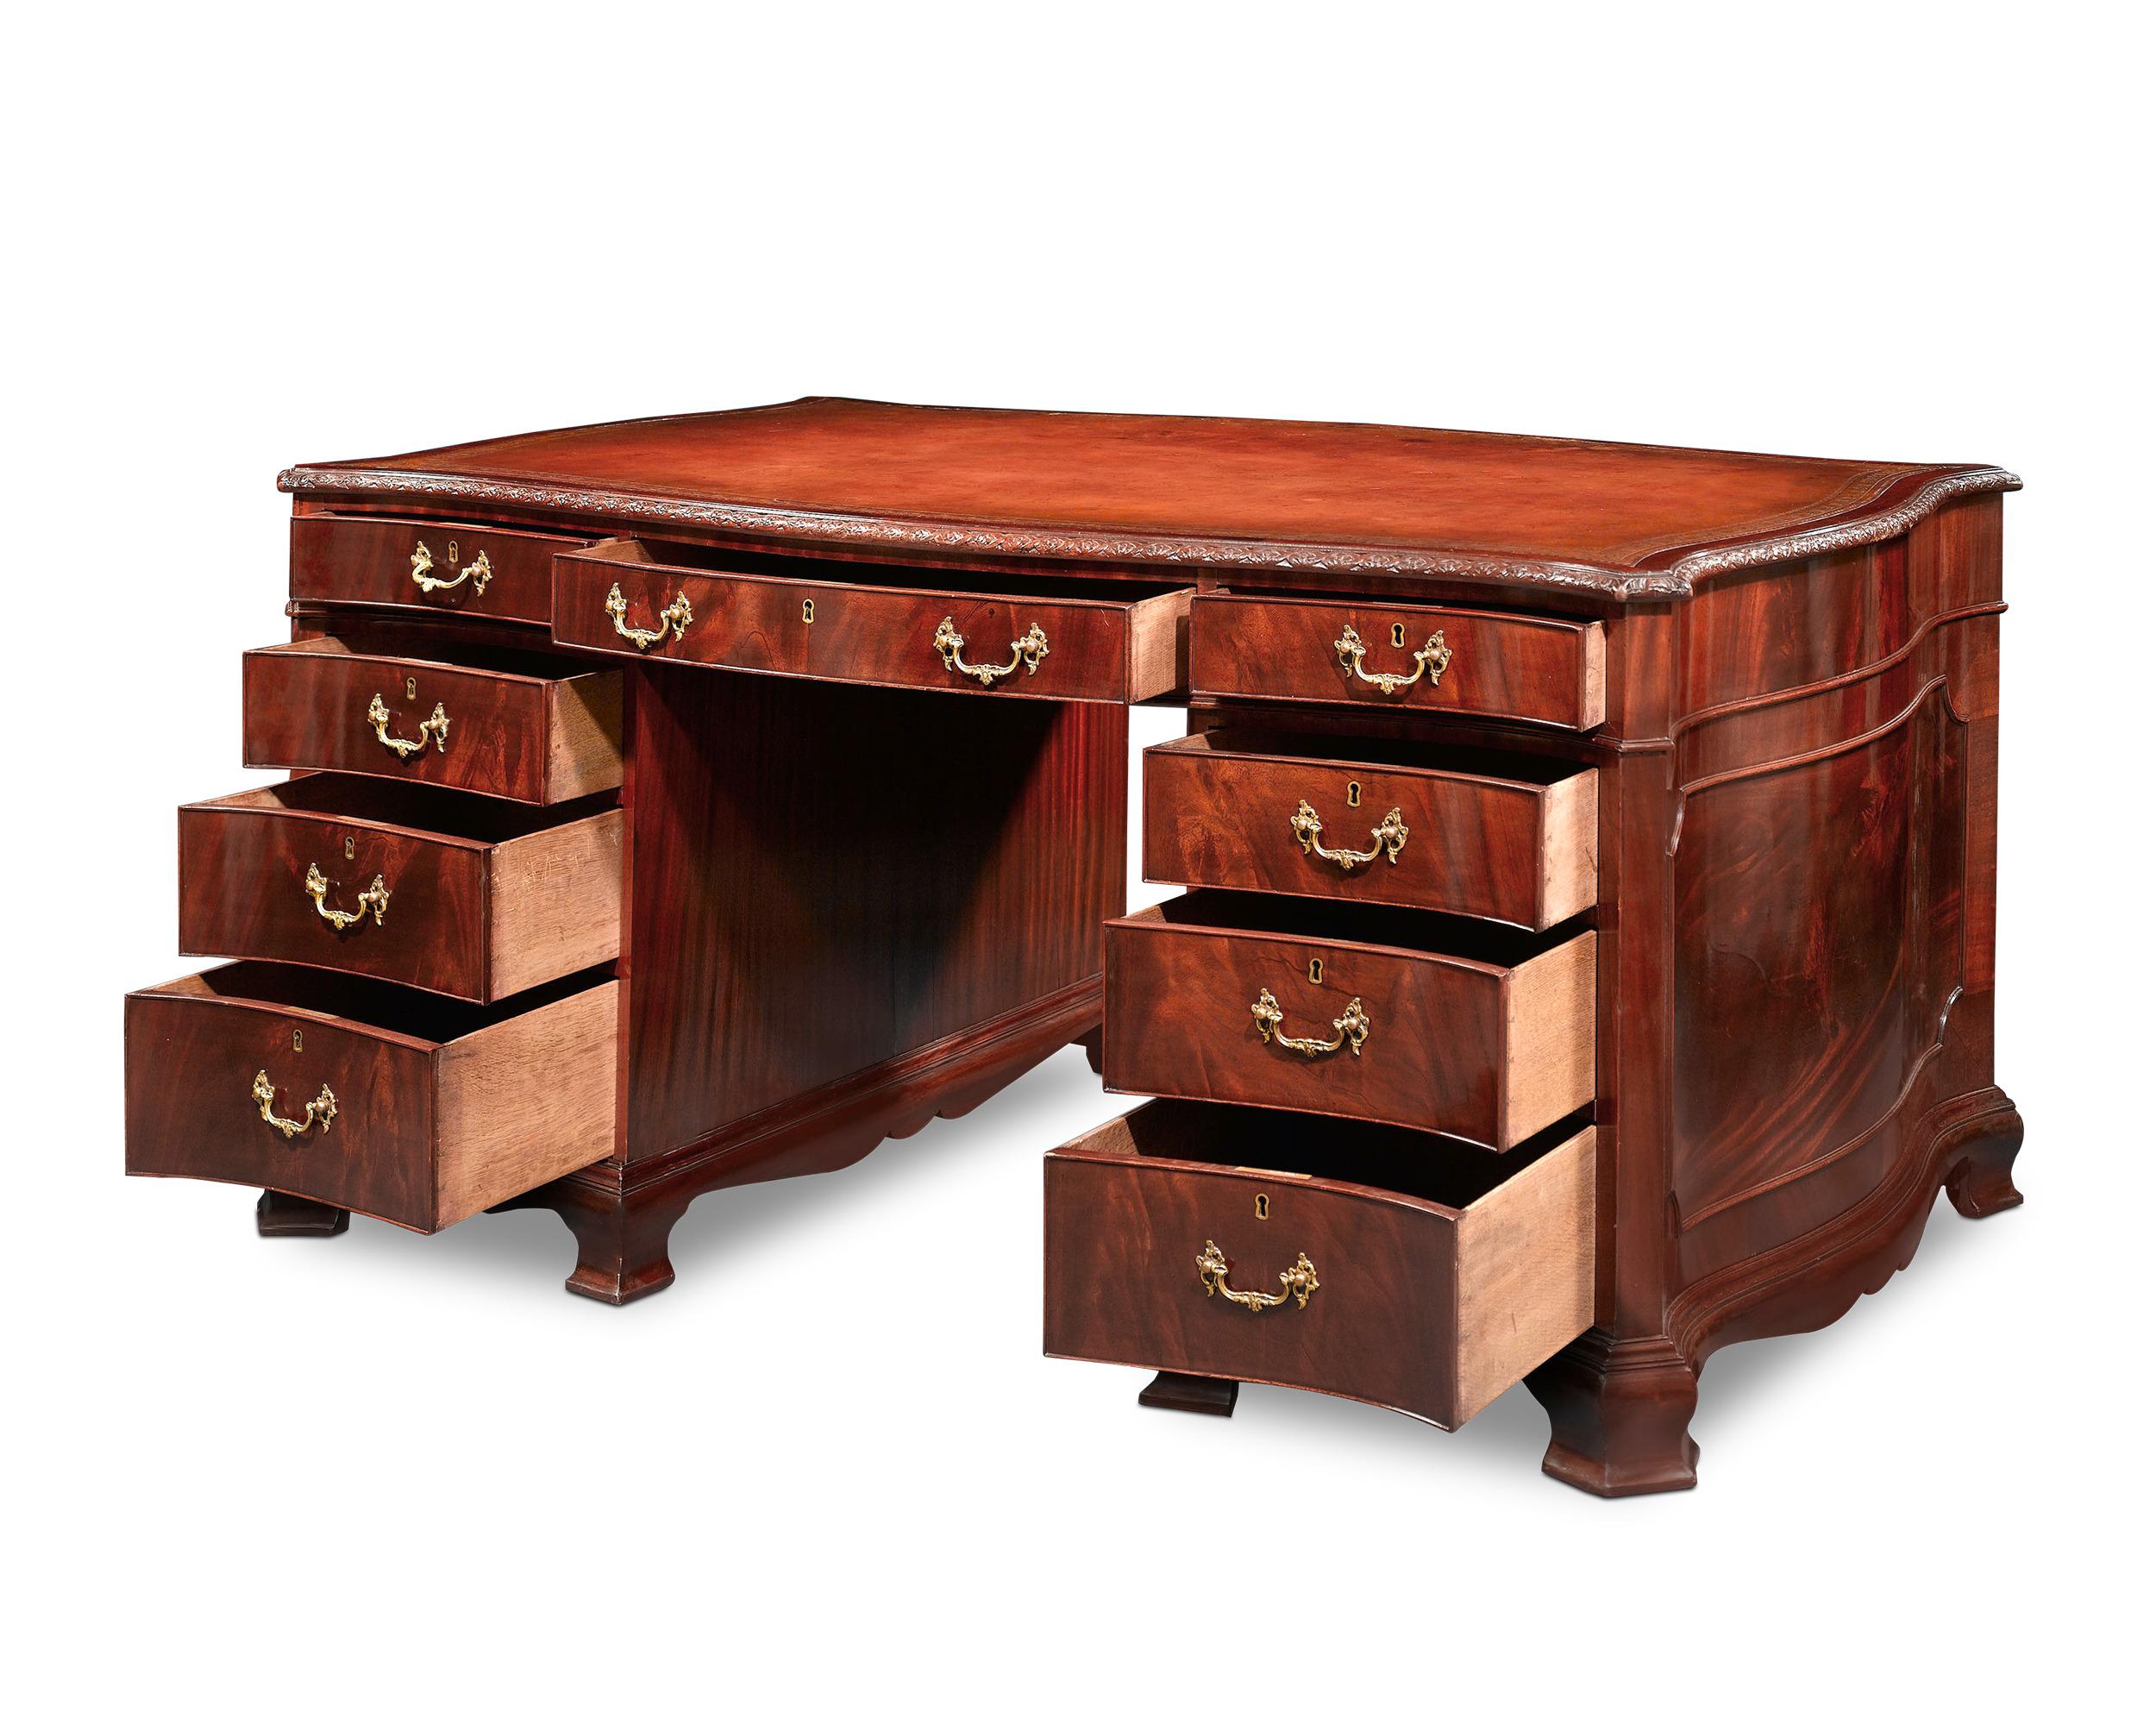 This handsome English partner's desk is expertly crafted with classic serpentine edges and bracket feet. Designed for dual use, each side is identical in appearance, with one side of the desk equipped with drawers and the other with hinged cabinets.